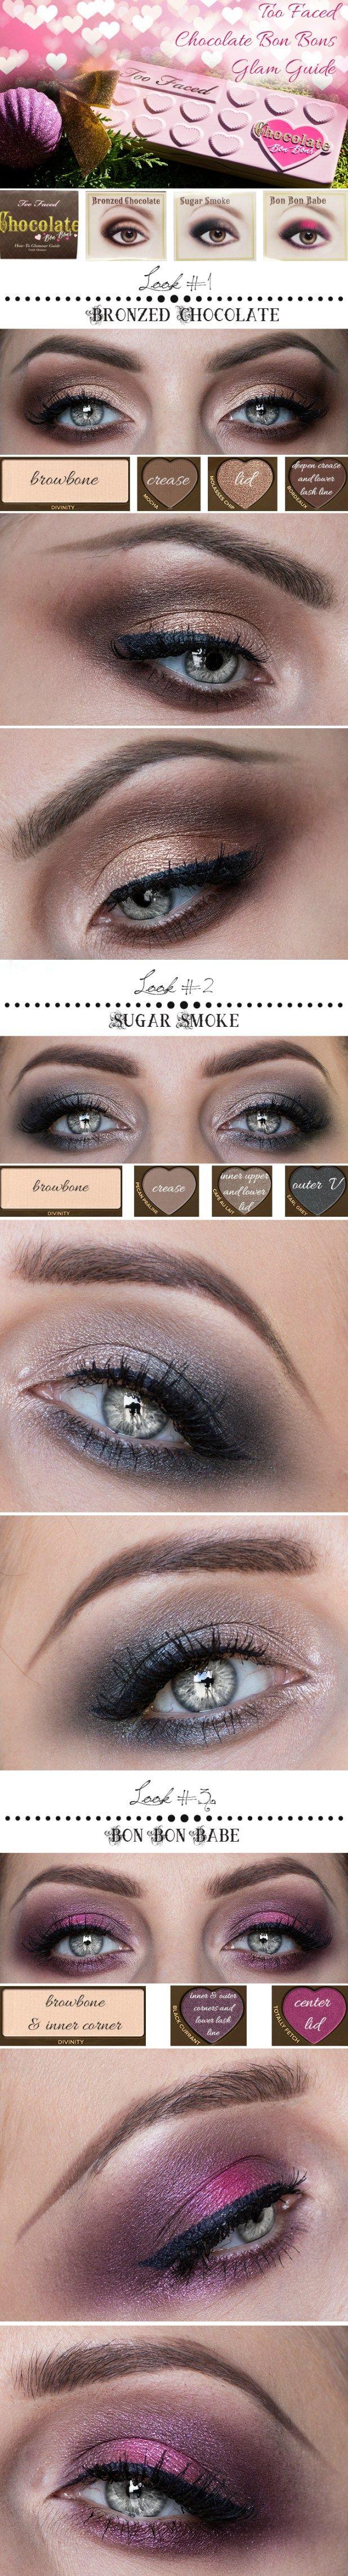 Wedding - Too Faced Chocolate Bon Bons Glam Guide